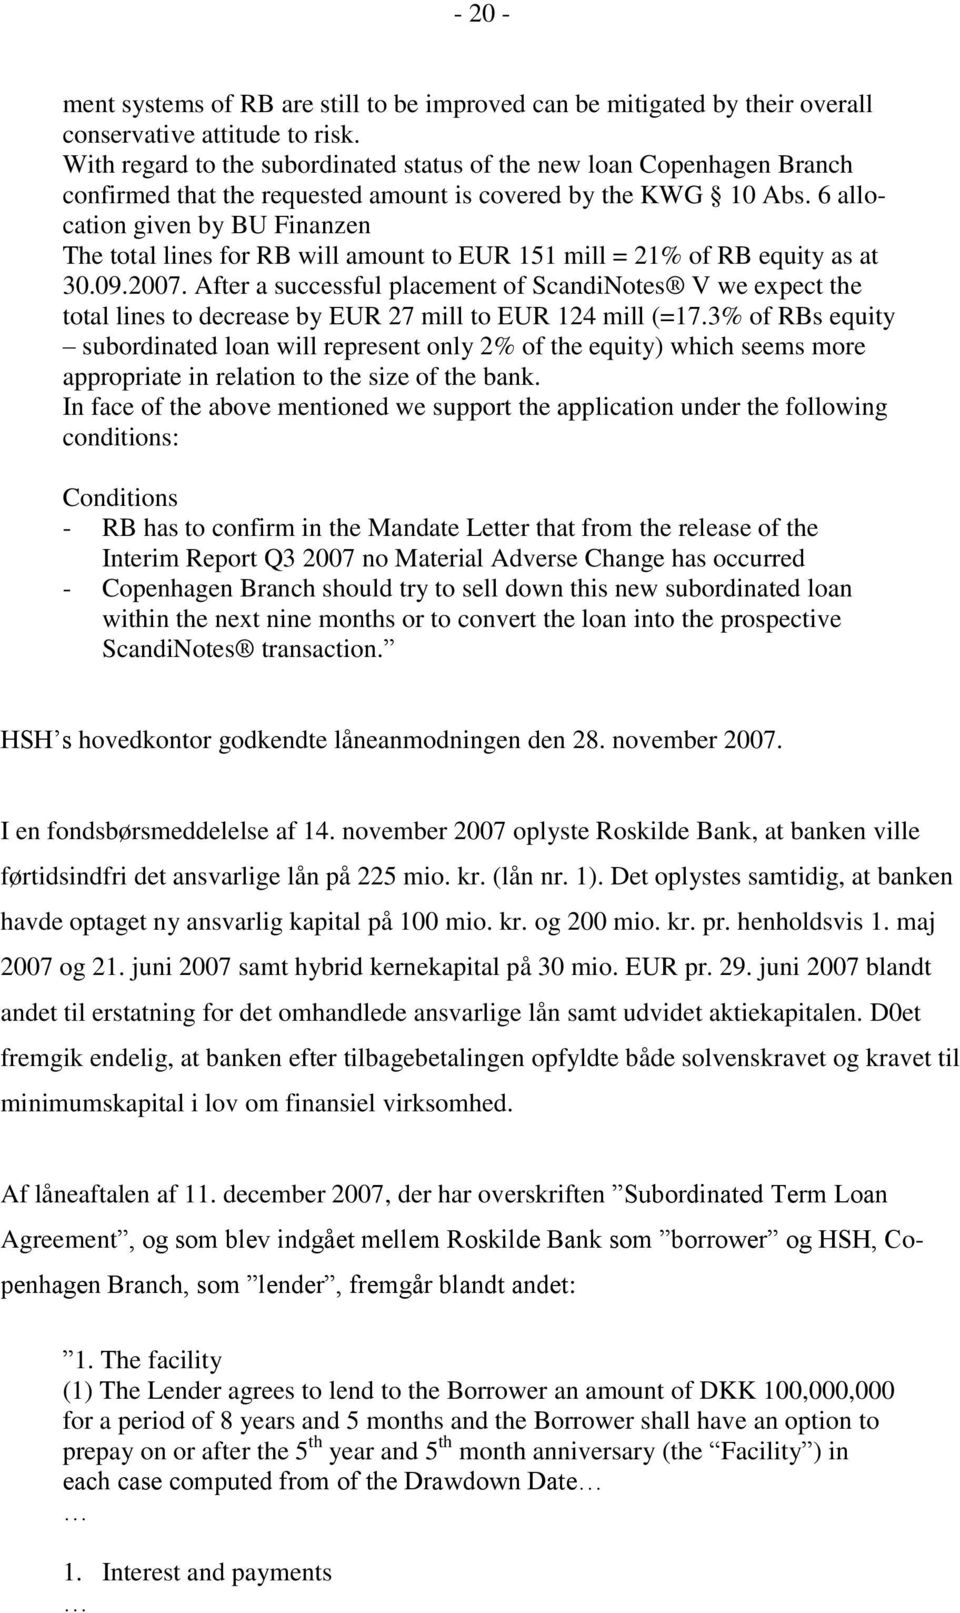 6 allocation given by BU Finanzen The total lines for RB will amount to EUR 151 mill = 21% of RB equity as at 30.09.2007.